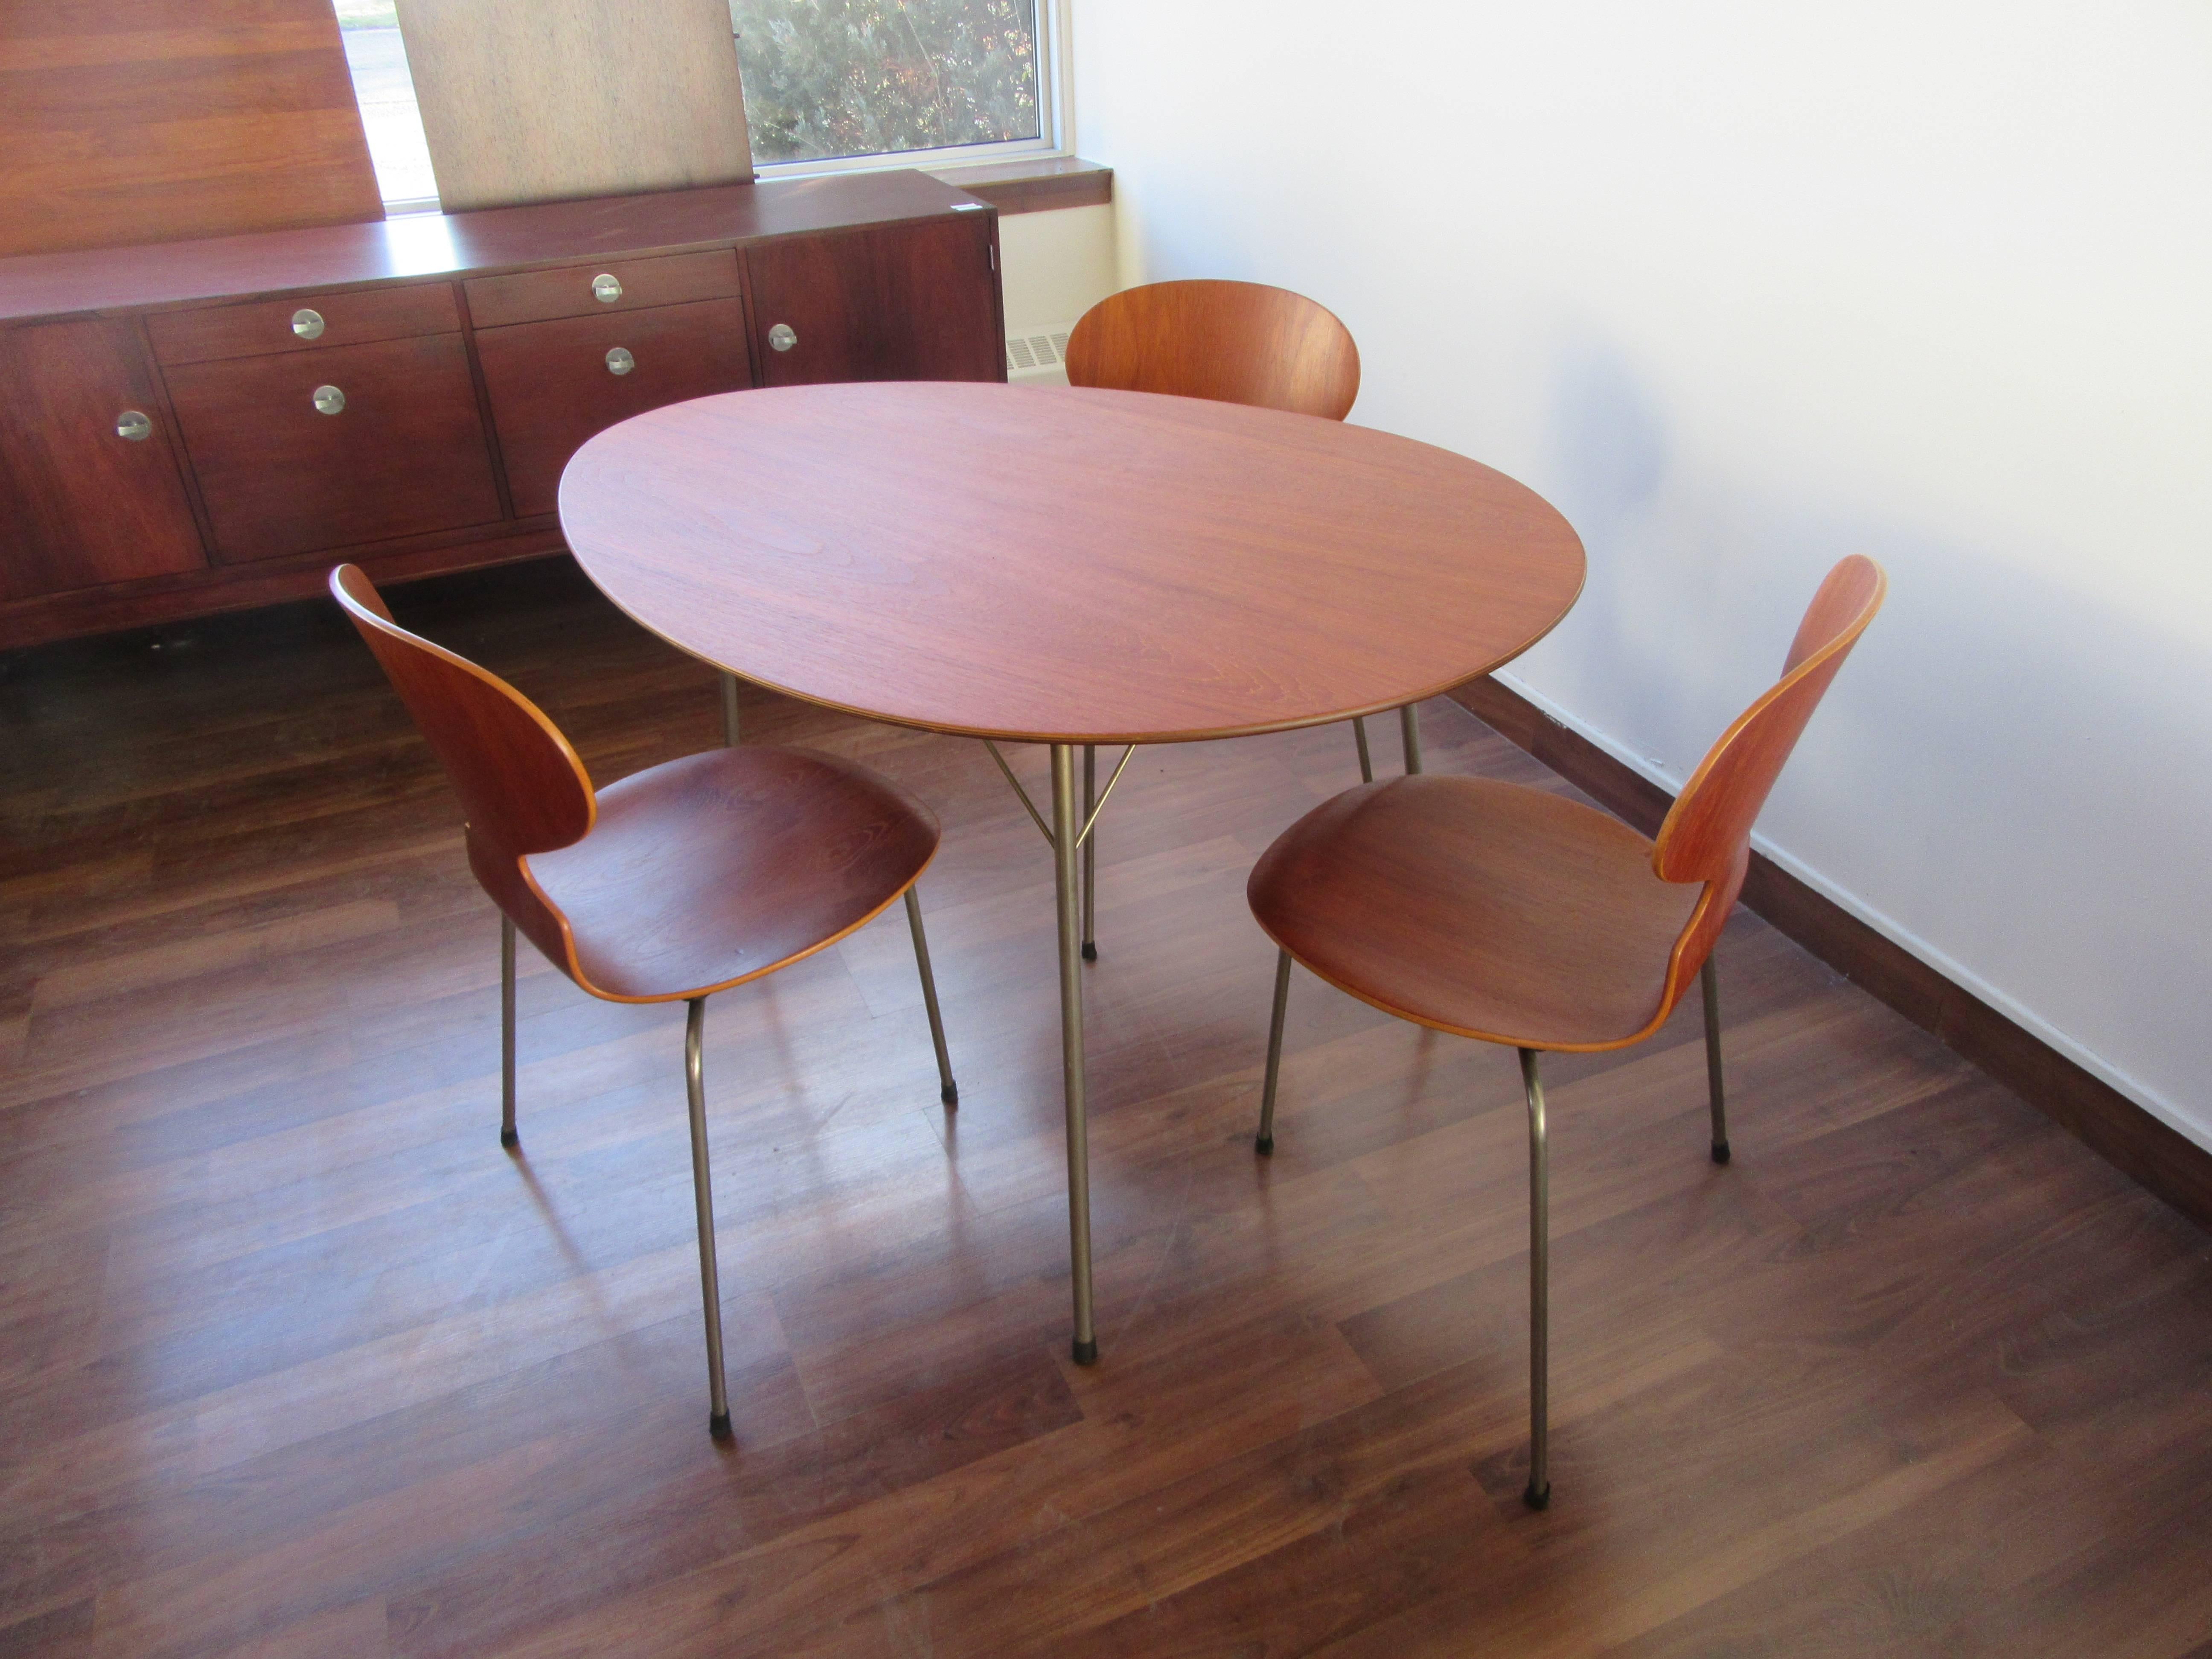 Spectacular three legged ant table with three ant chairs in teak, featuring  a chromium plated tubular steel frame. Arne Jacobsen Model 3603 original 1950s production, mint condition. Maker's logo on frame.